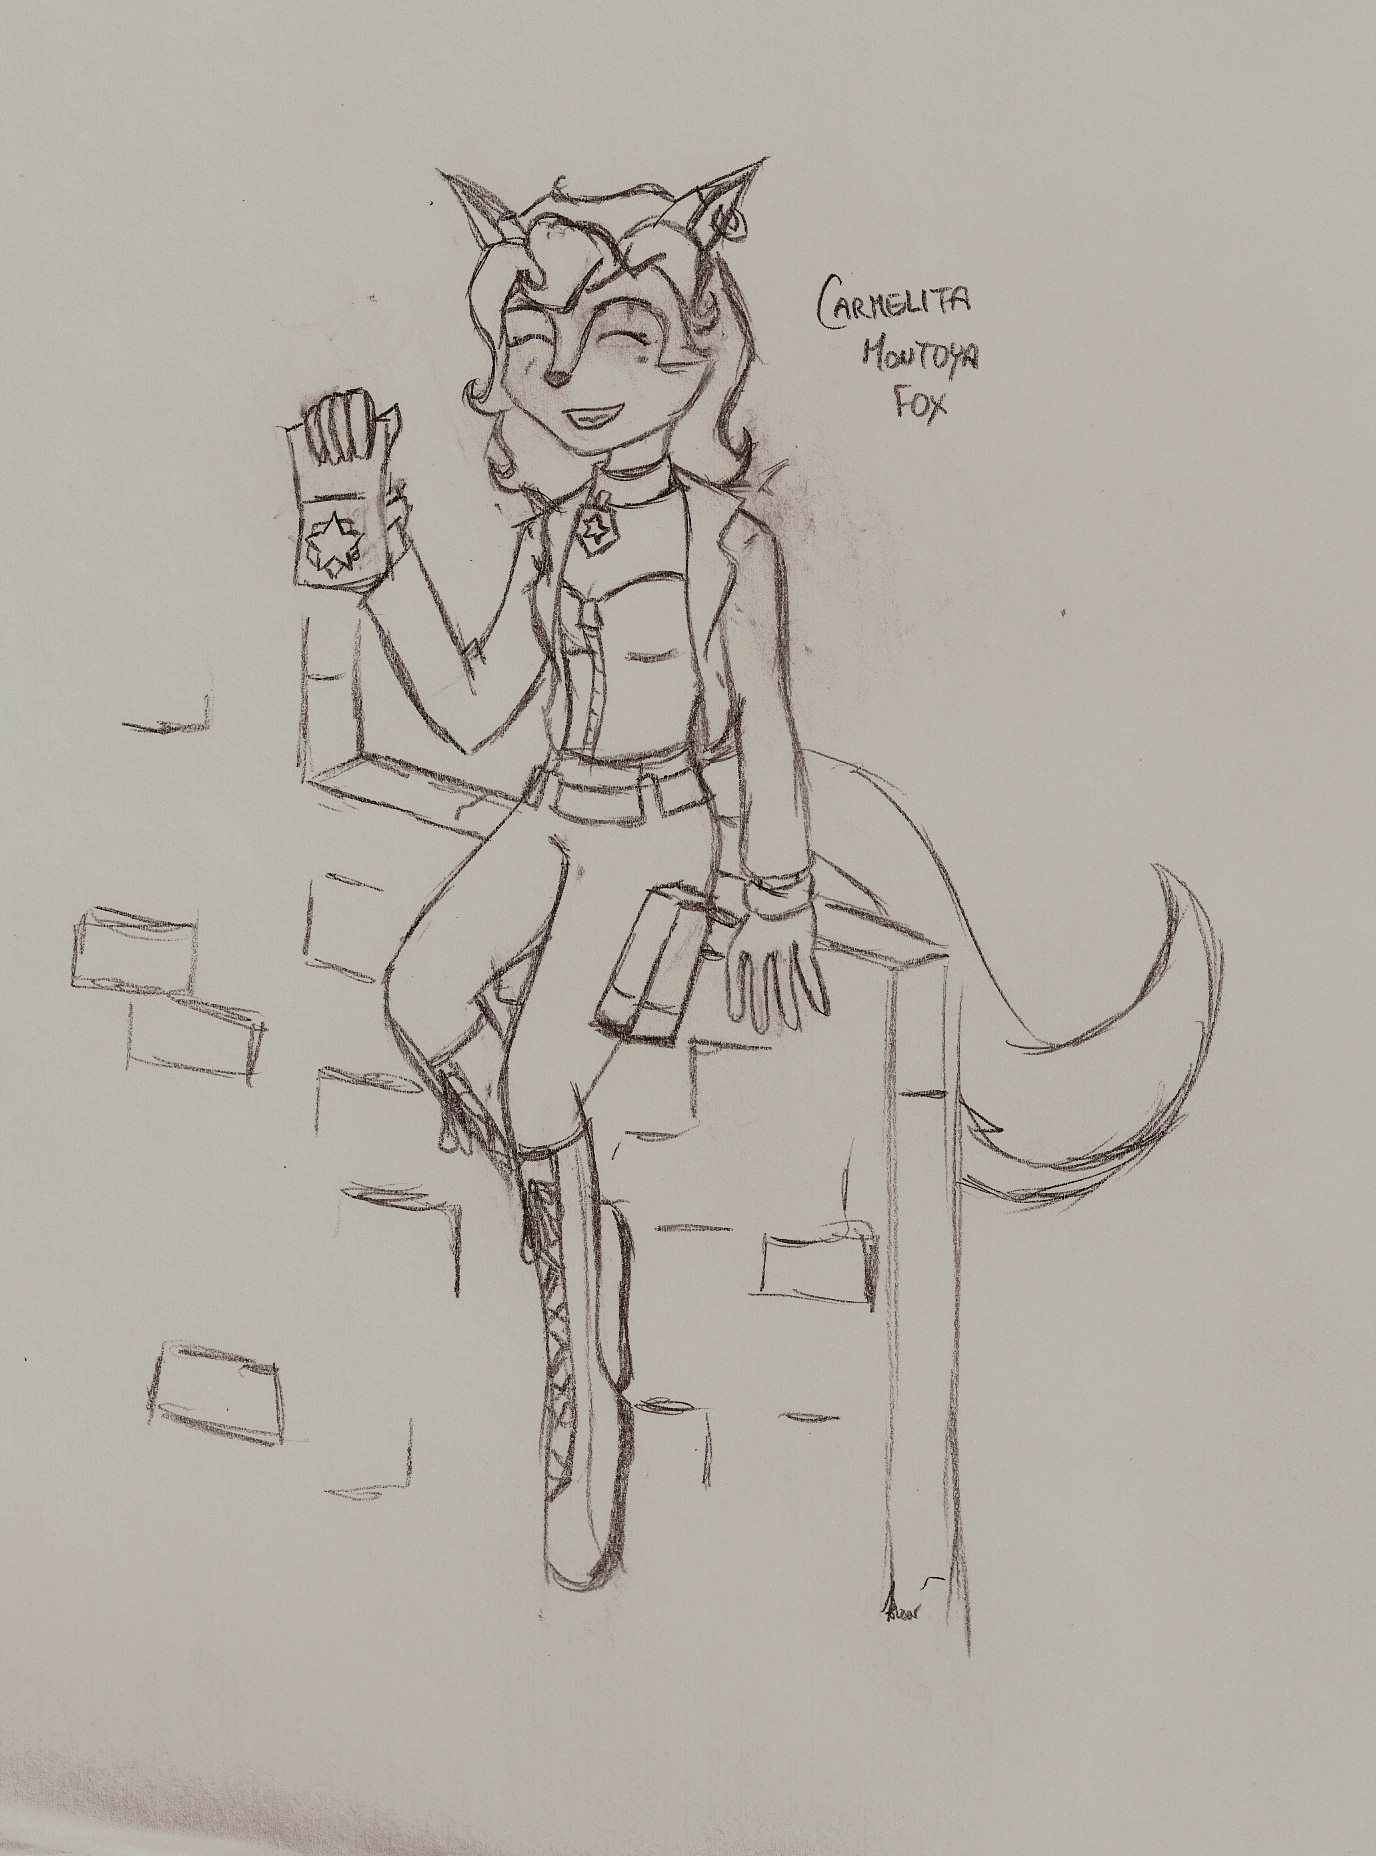 Carmelita-Request for Interpol by mystic_rat_theif